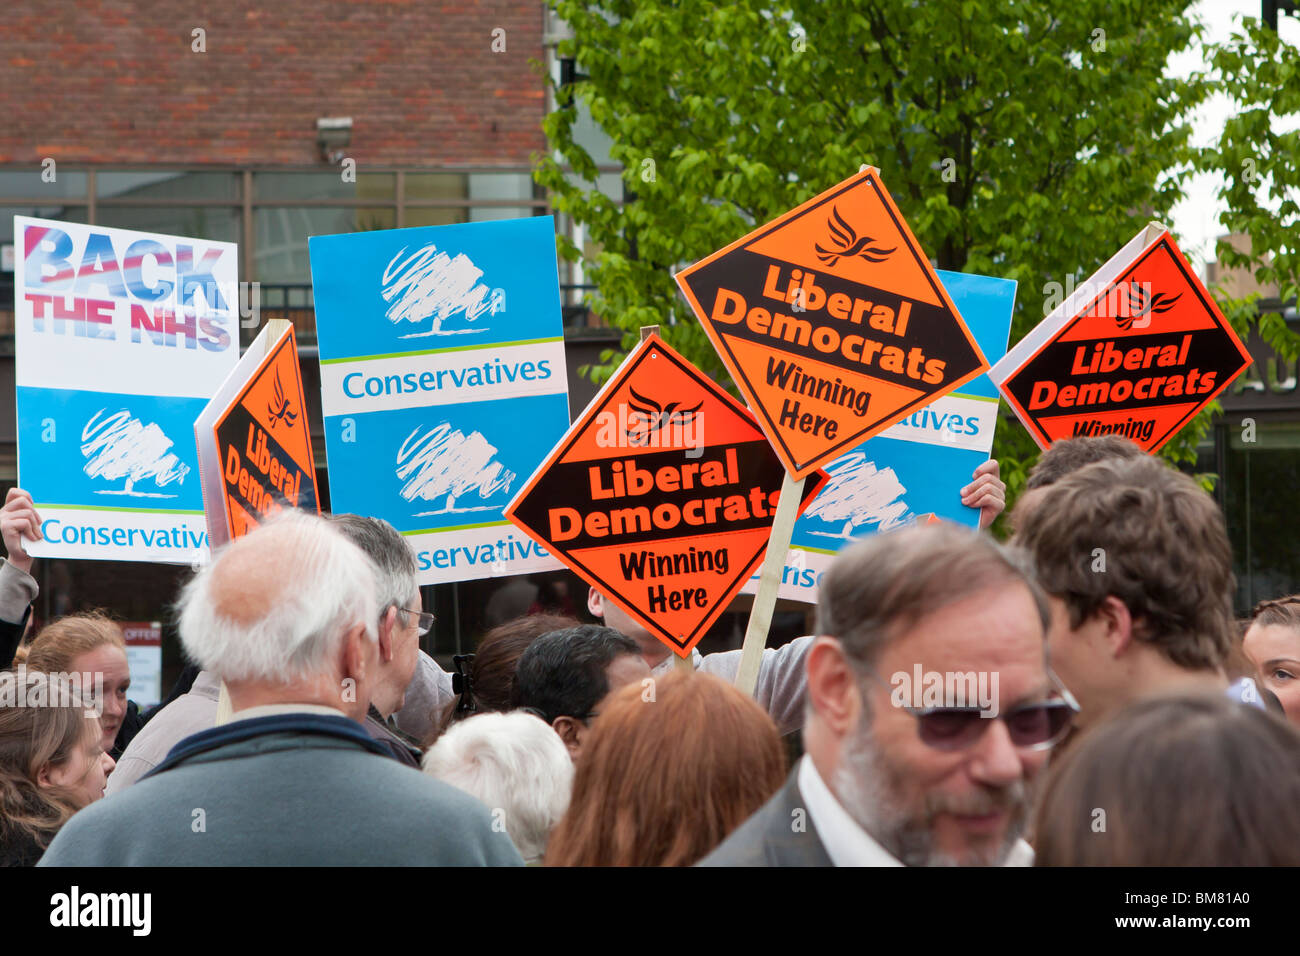 Conservative and Liberal Democrat supporters at an election rally in St Albans Stock Photo